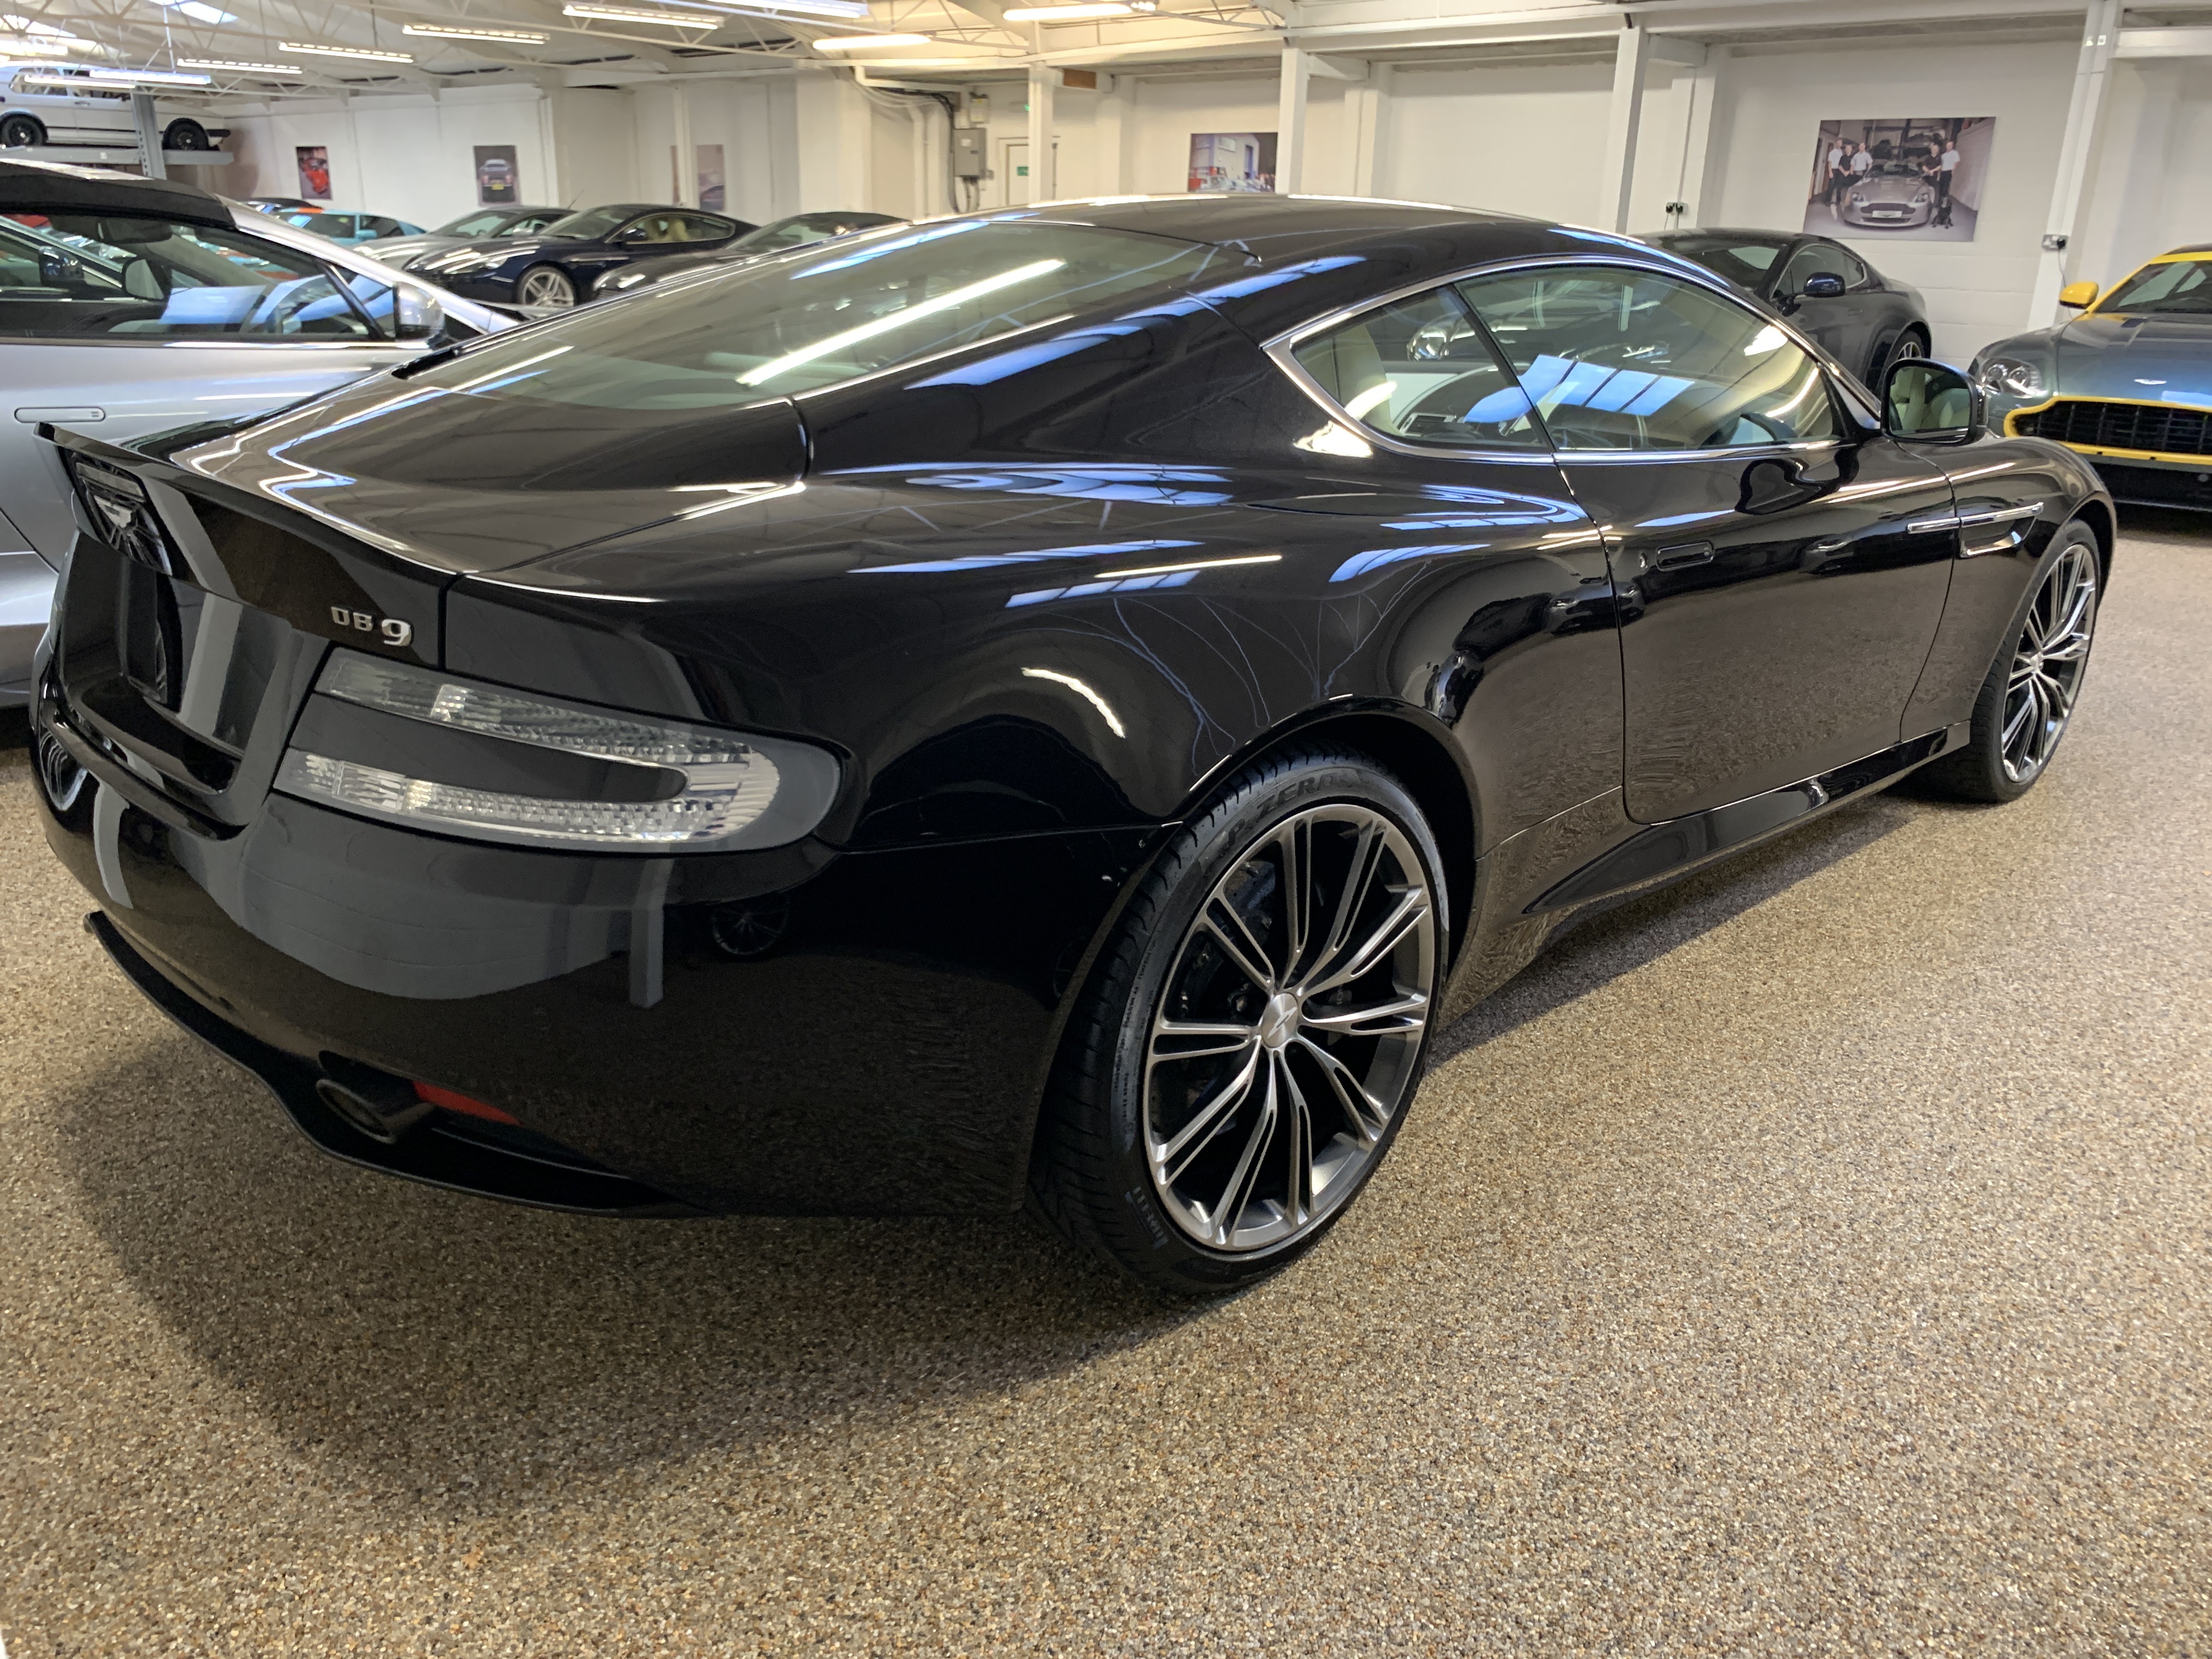 Used Aston Martin DB9 For sale